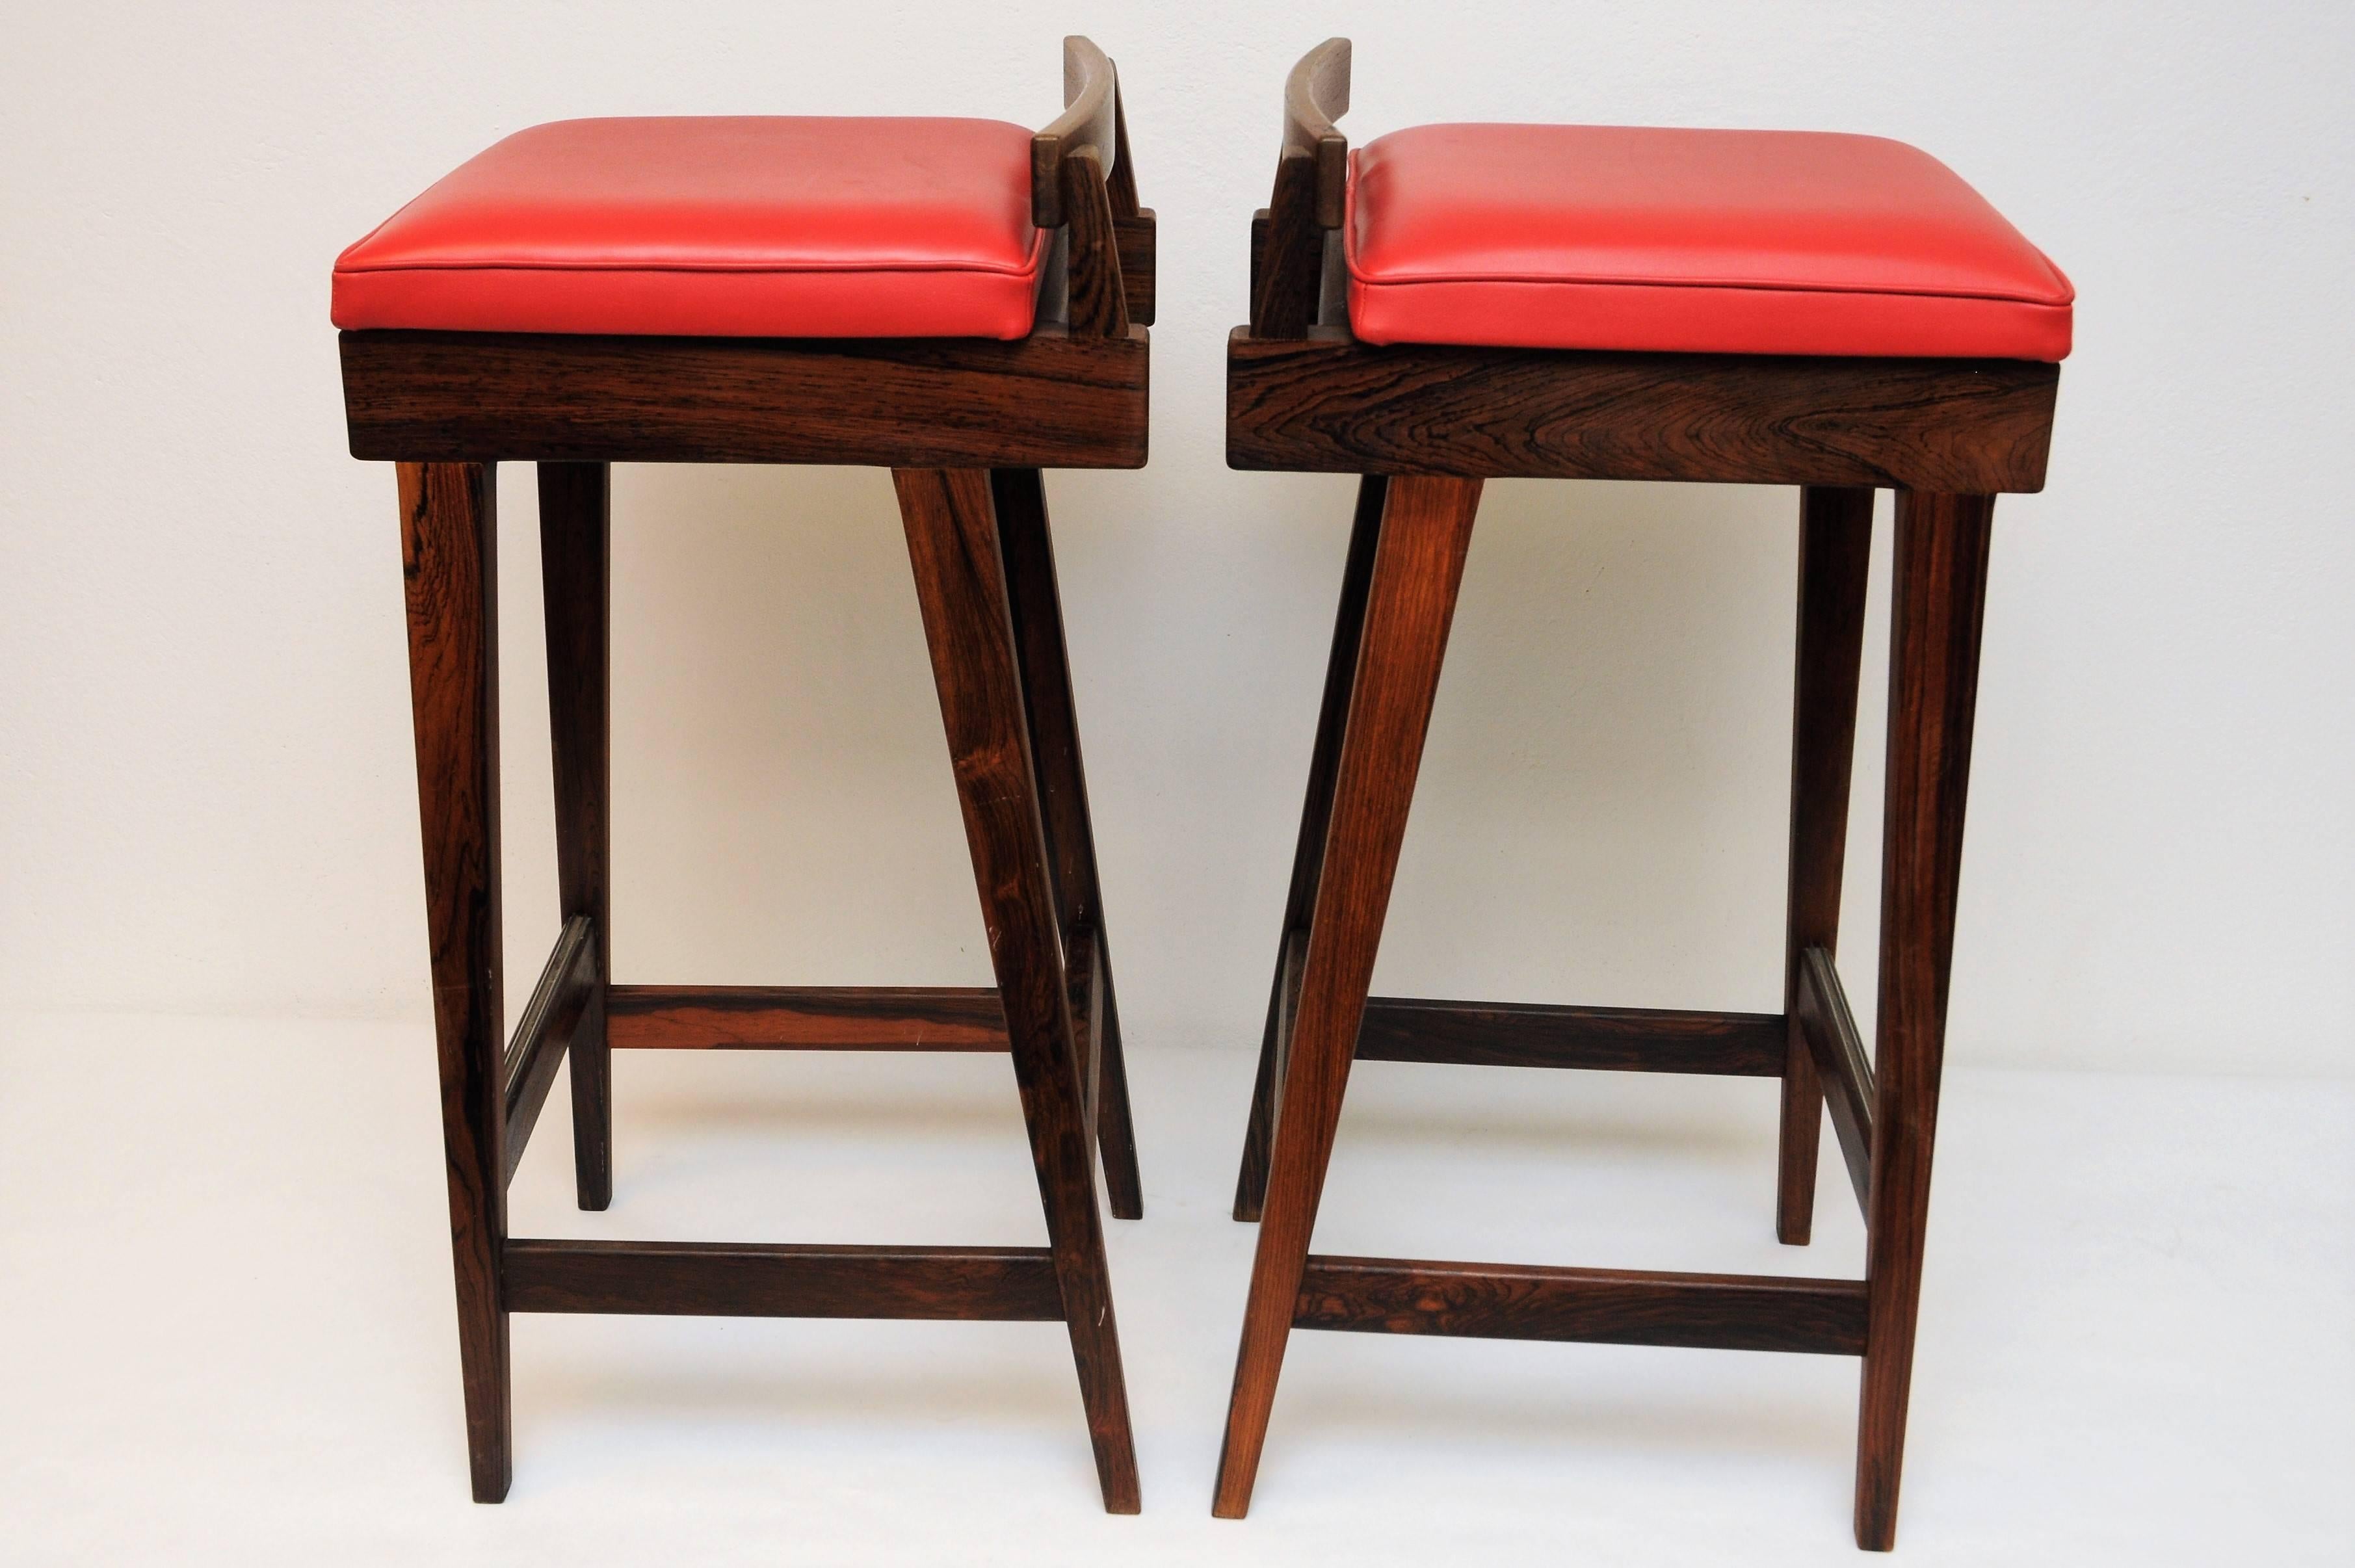 These three rosewood barstools were designed by Knud Bent and produced by Dyrlund, Denmark circa in the 1970s. They feature red upholstery.
